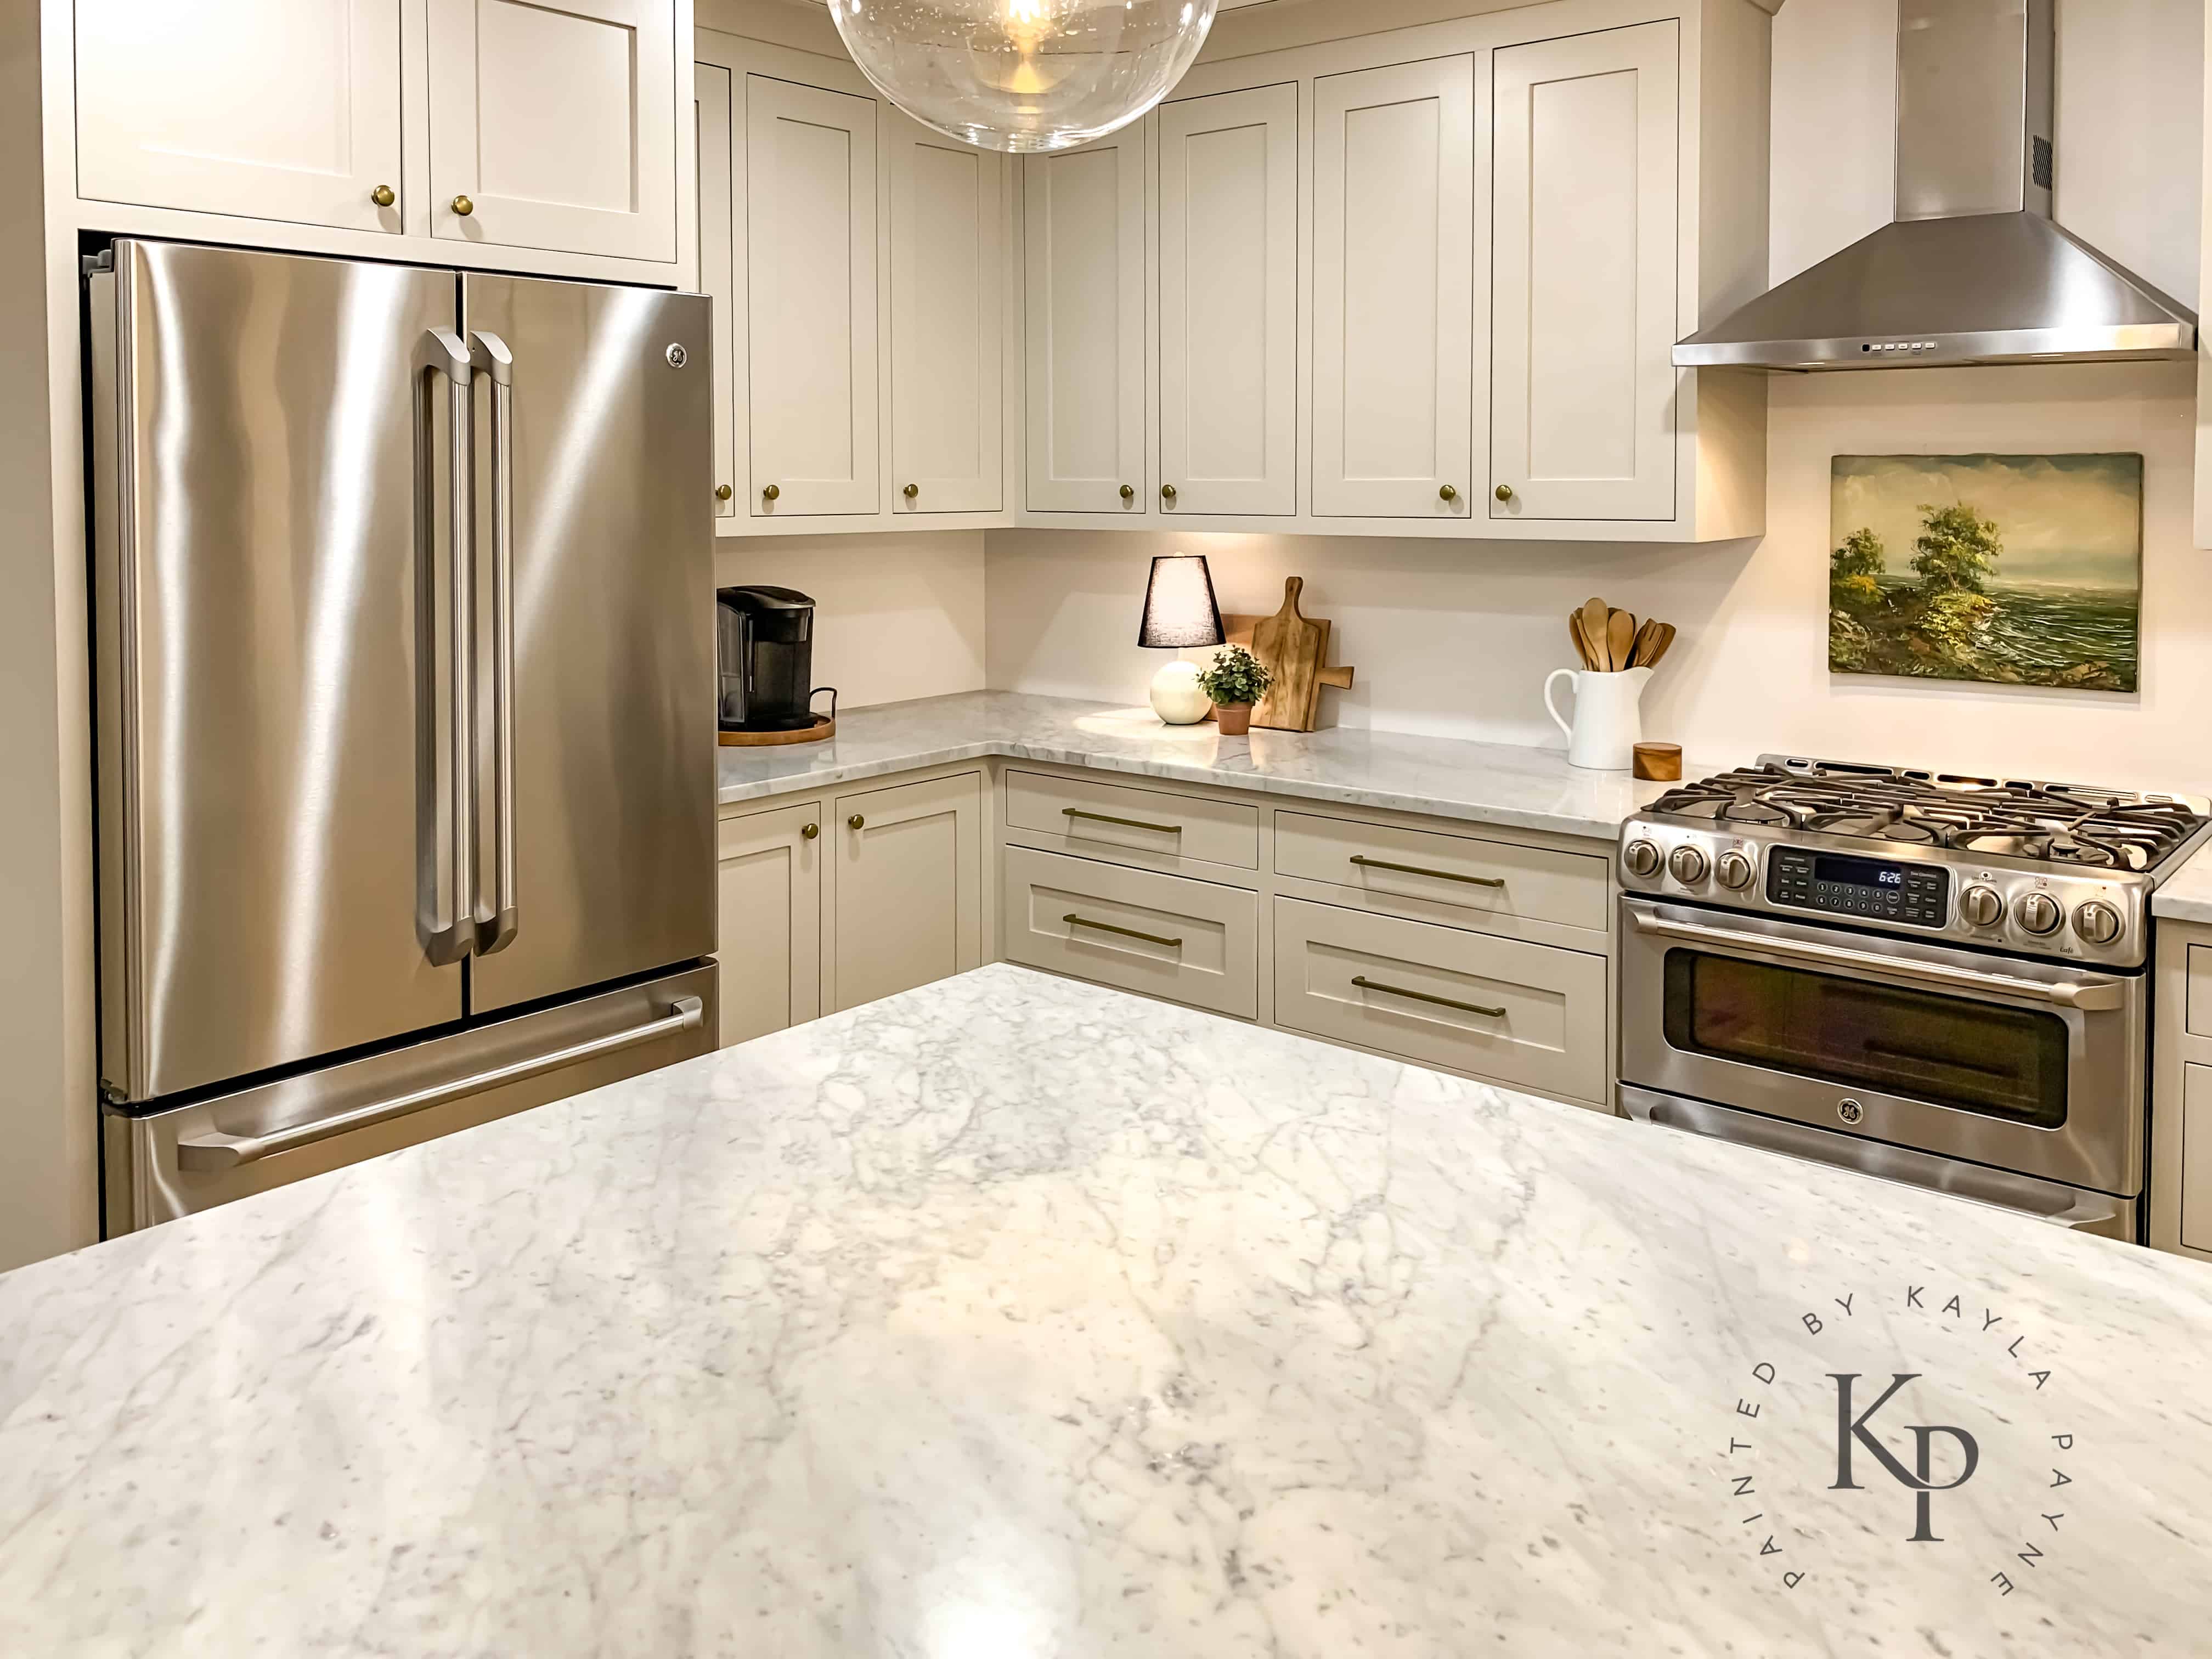 Carrara marble countertops in kitchen with revere pewter painted cabinets